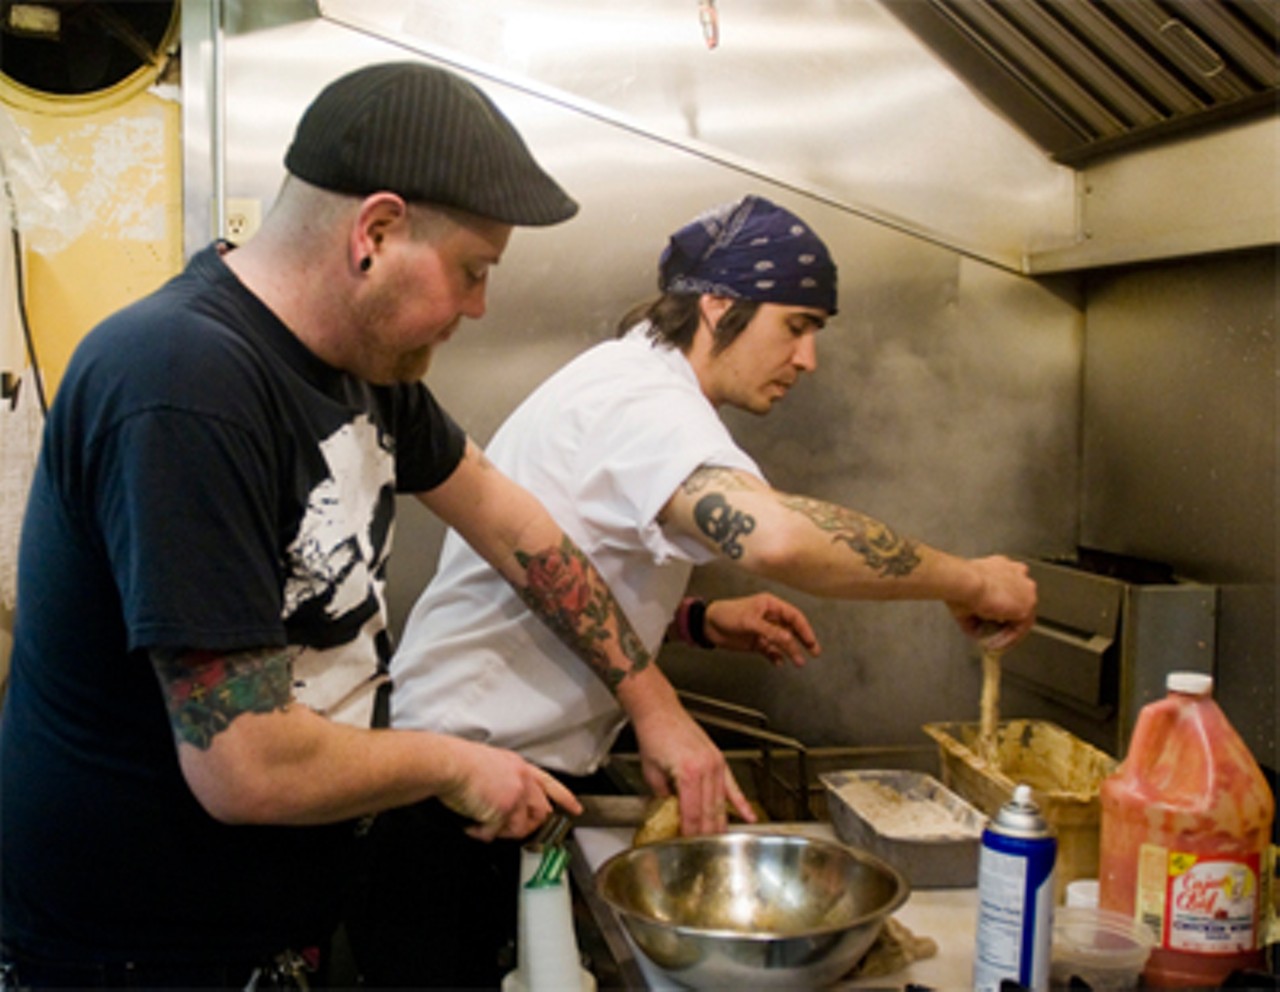 Jimmy Hippchen, left, cooks with chef Jaxon Noon. Read our review of the Bleeding Deacon by Ian Froeb.